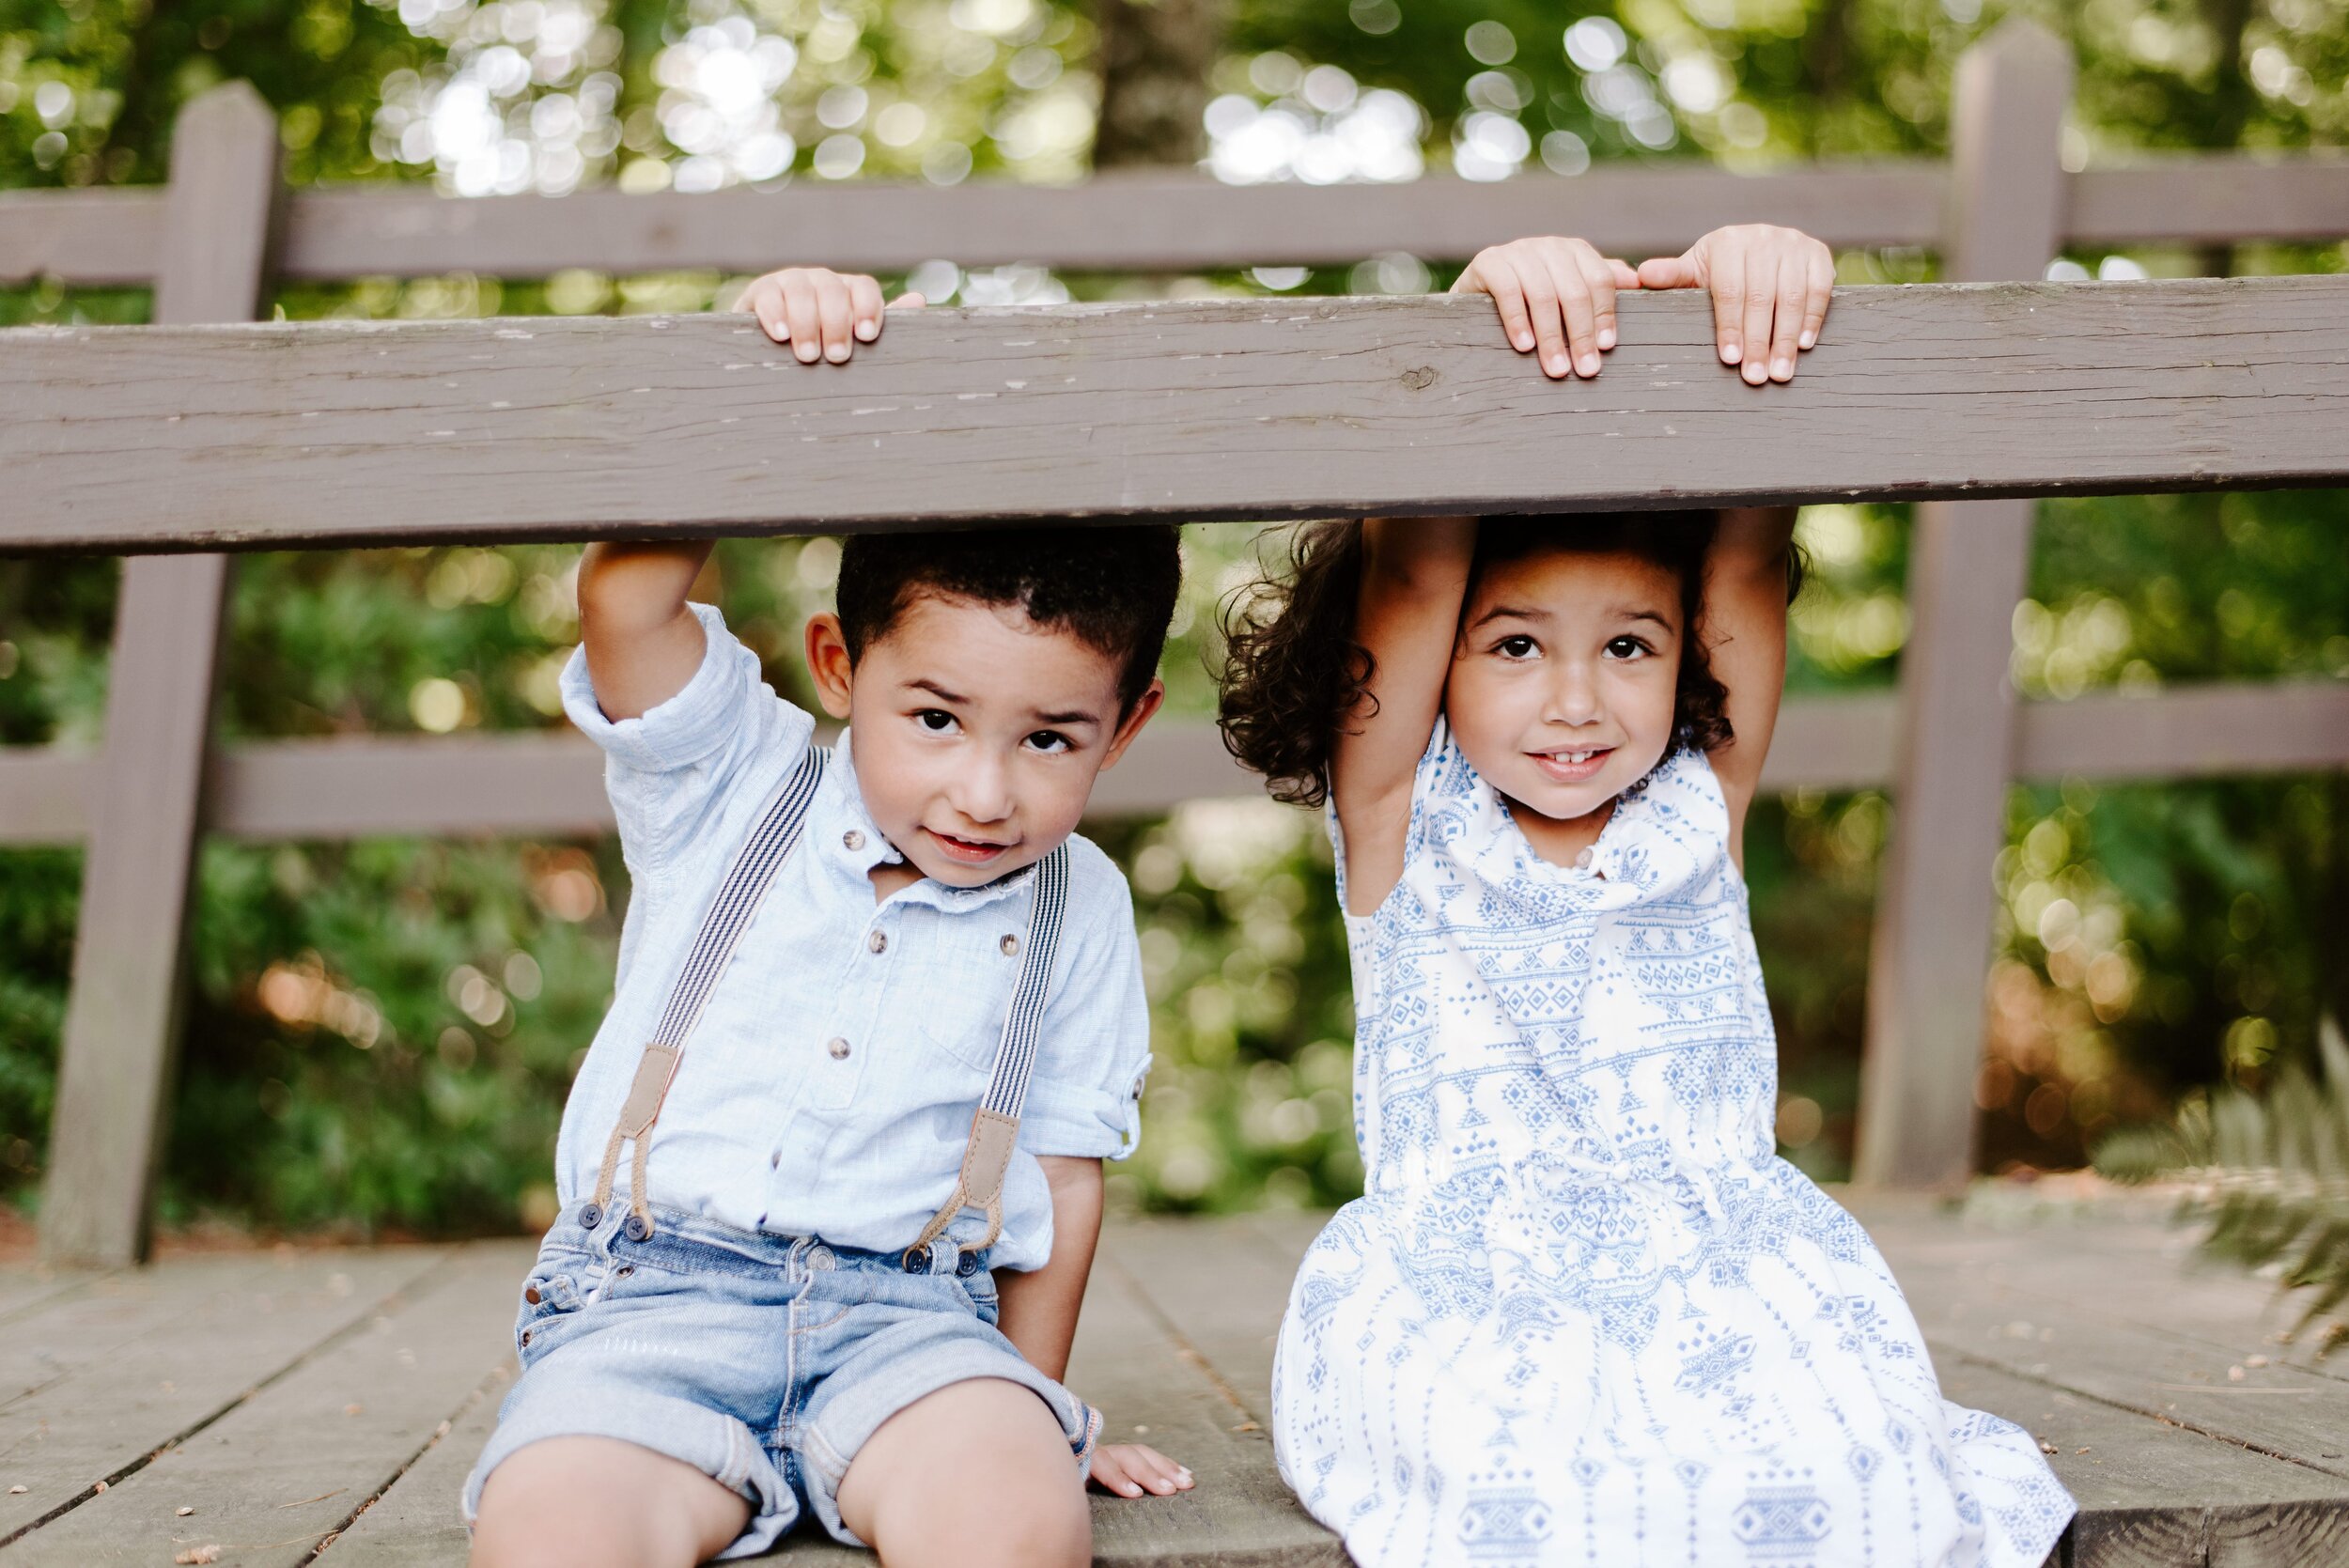 New York Westchester Lifestyle Photographer Summer Family Photos Son Daughter Kids Playing.jpg